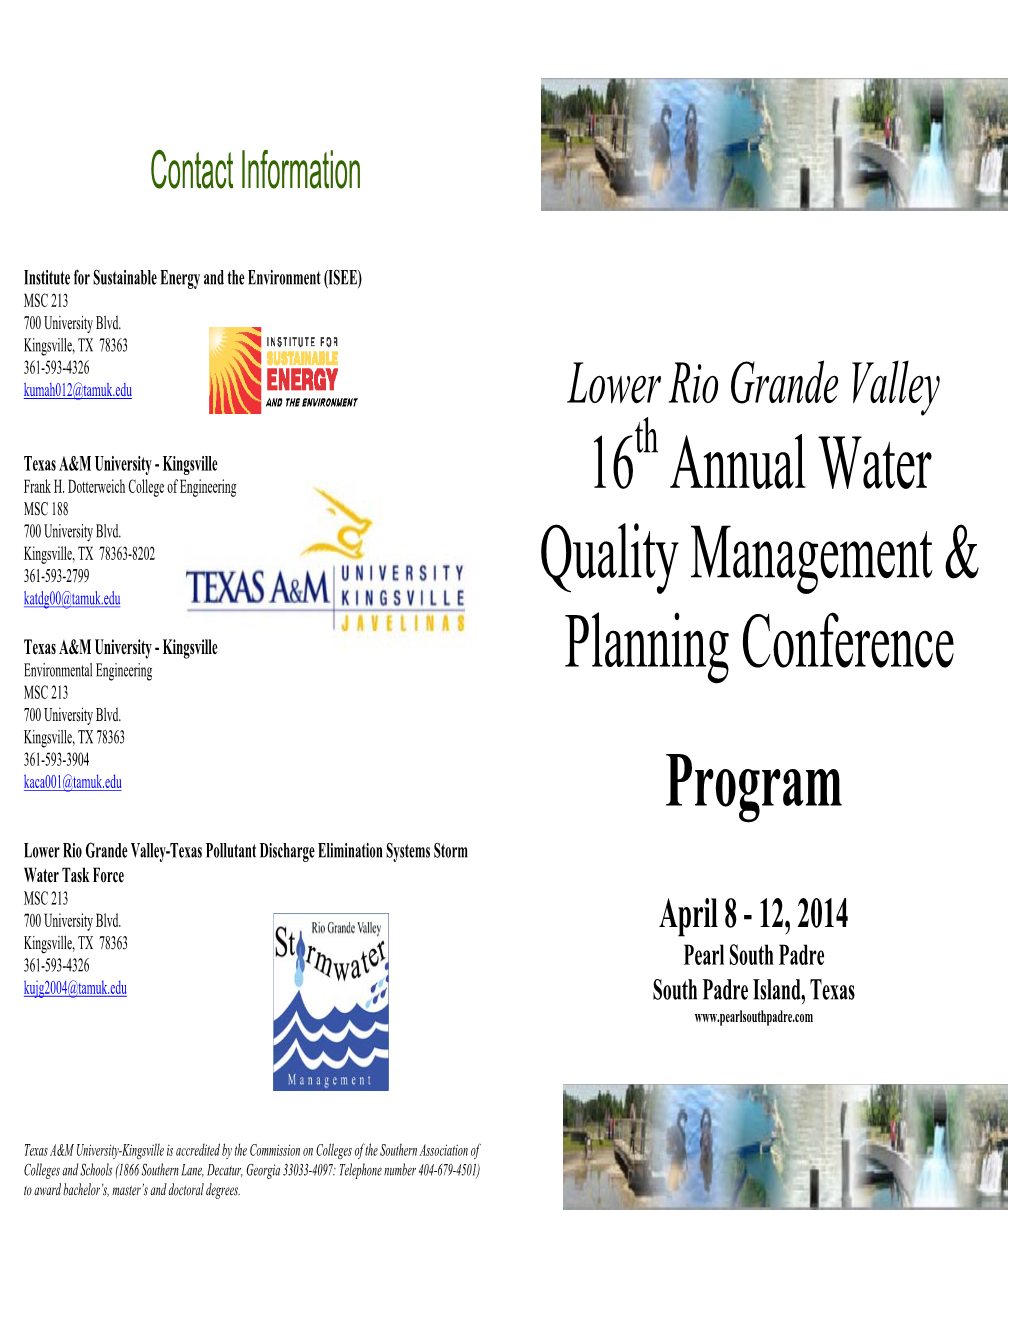 16 Annual Water Quality Management & Planning Conference Program